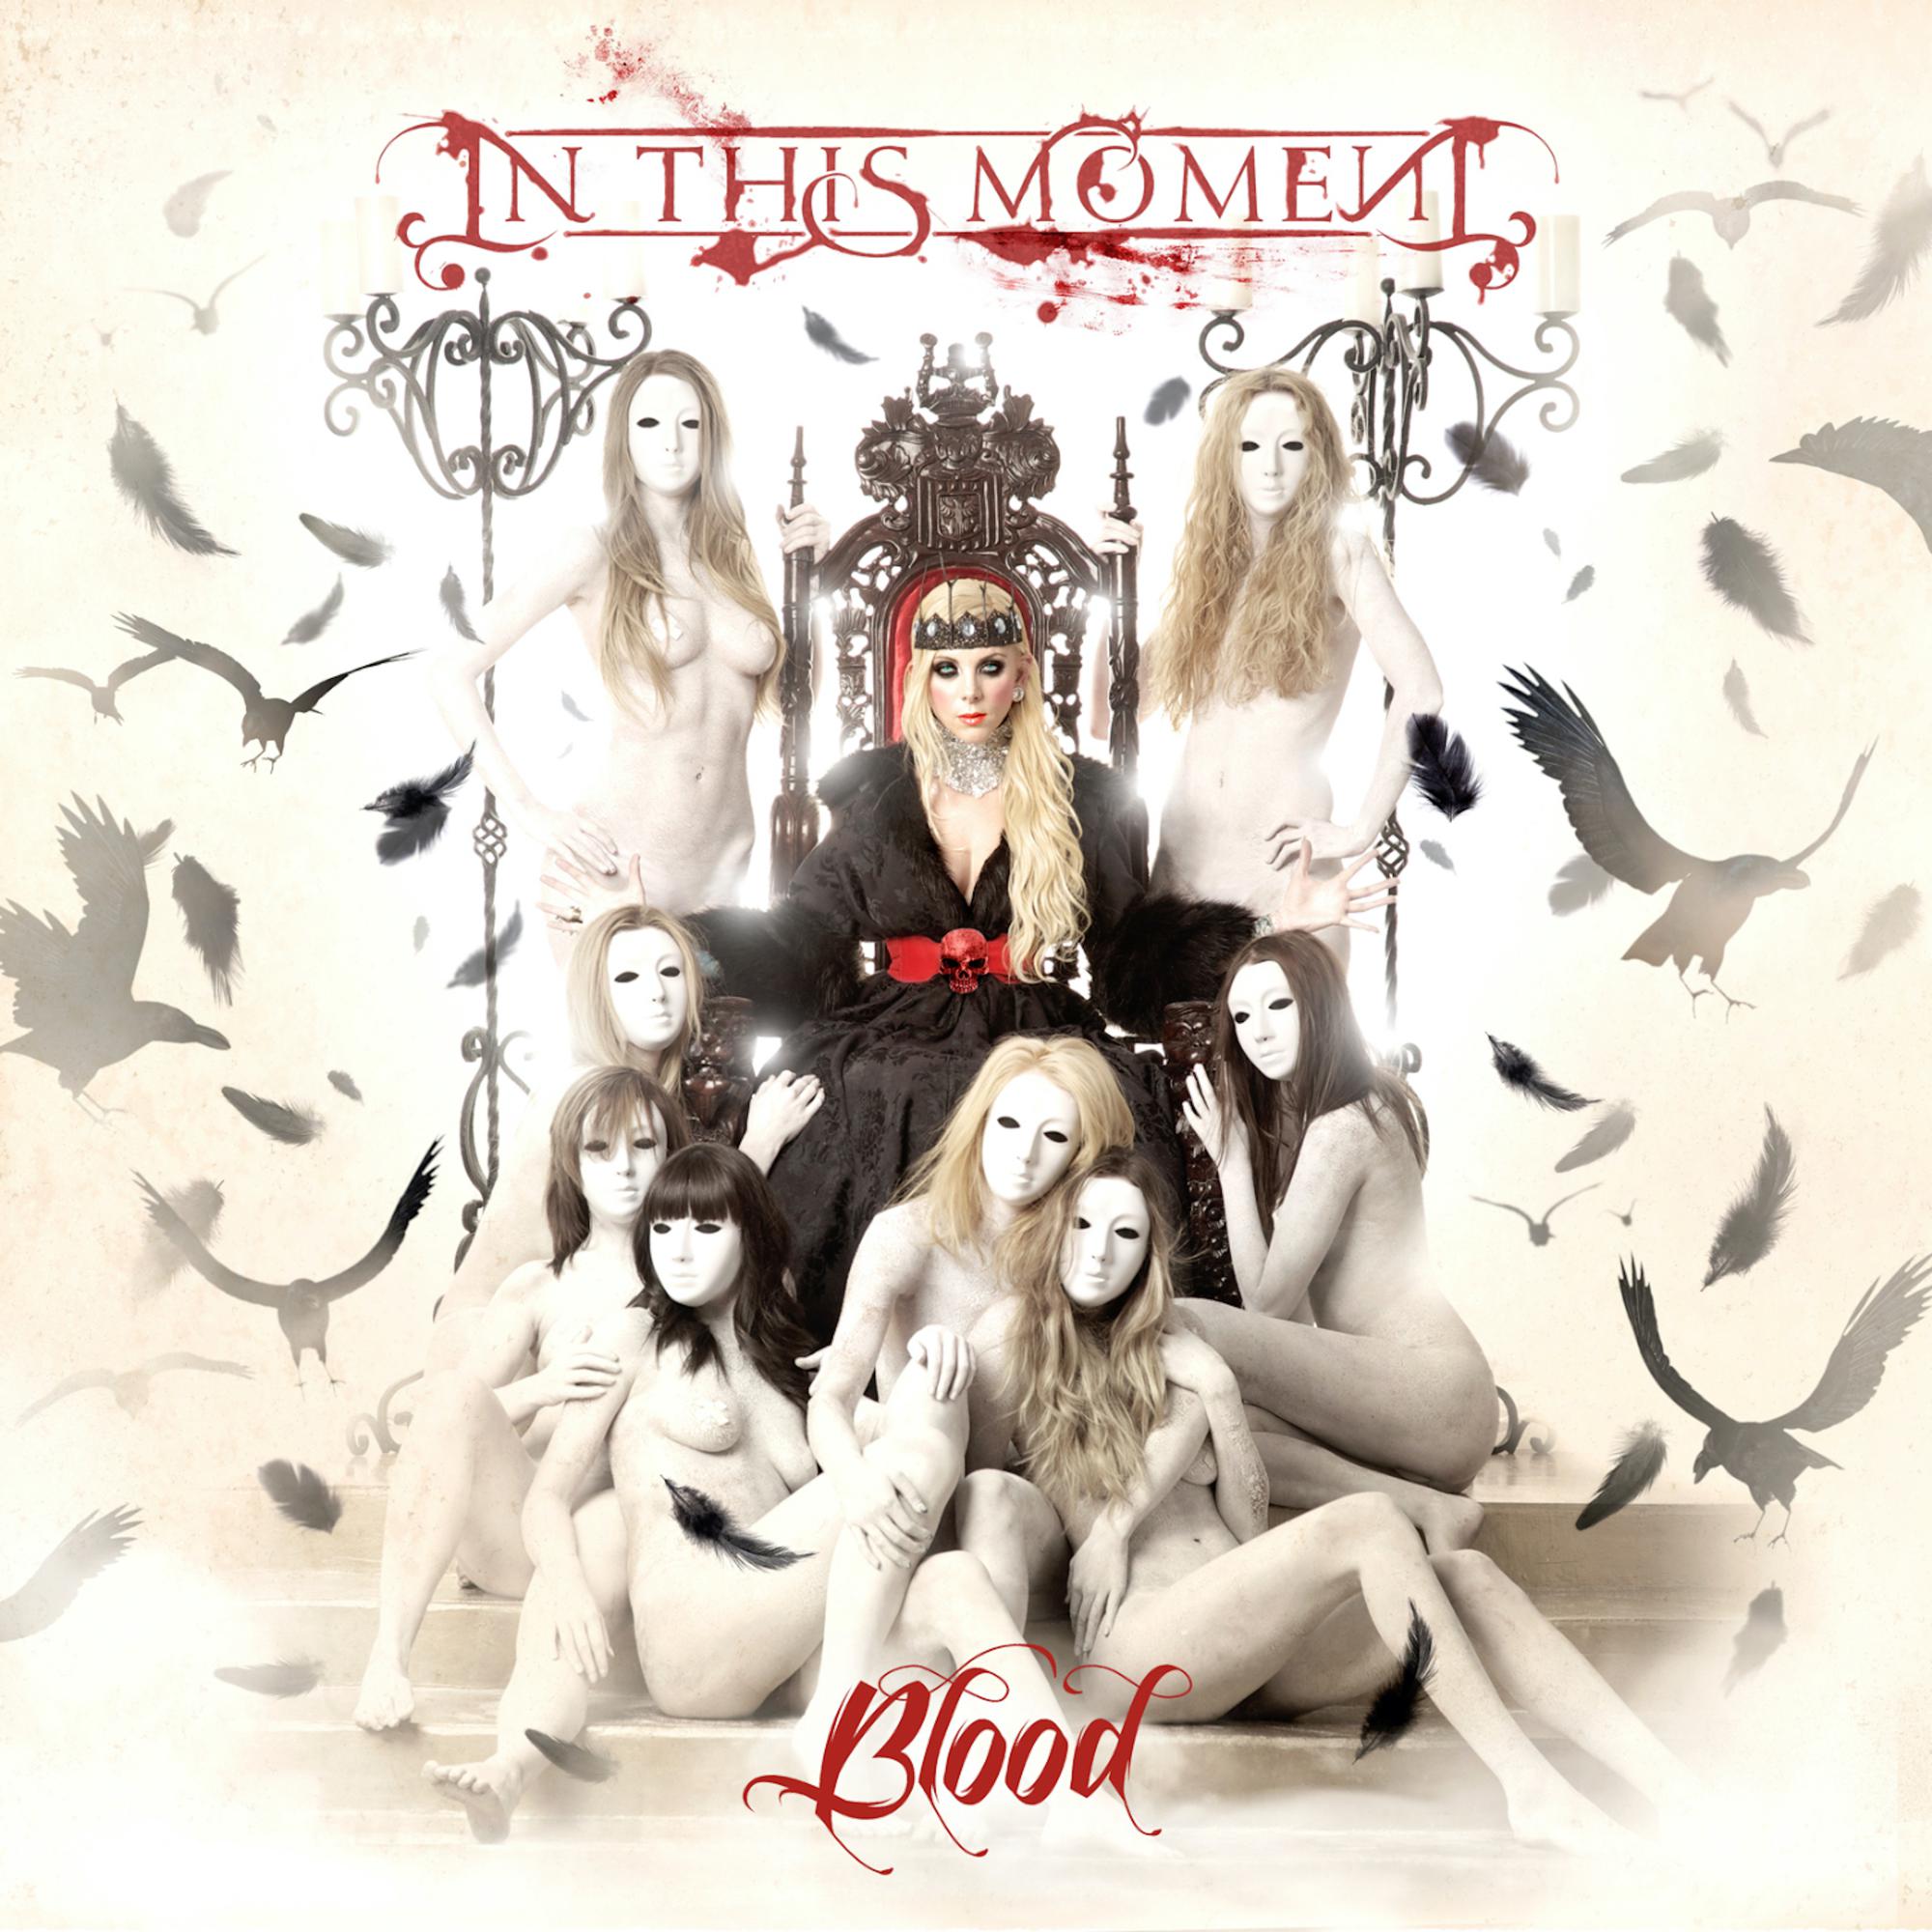 IN THIS MOMENT 'BLOOD' LP